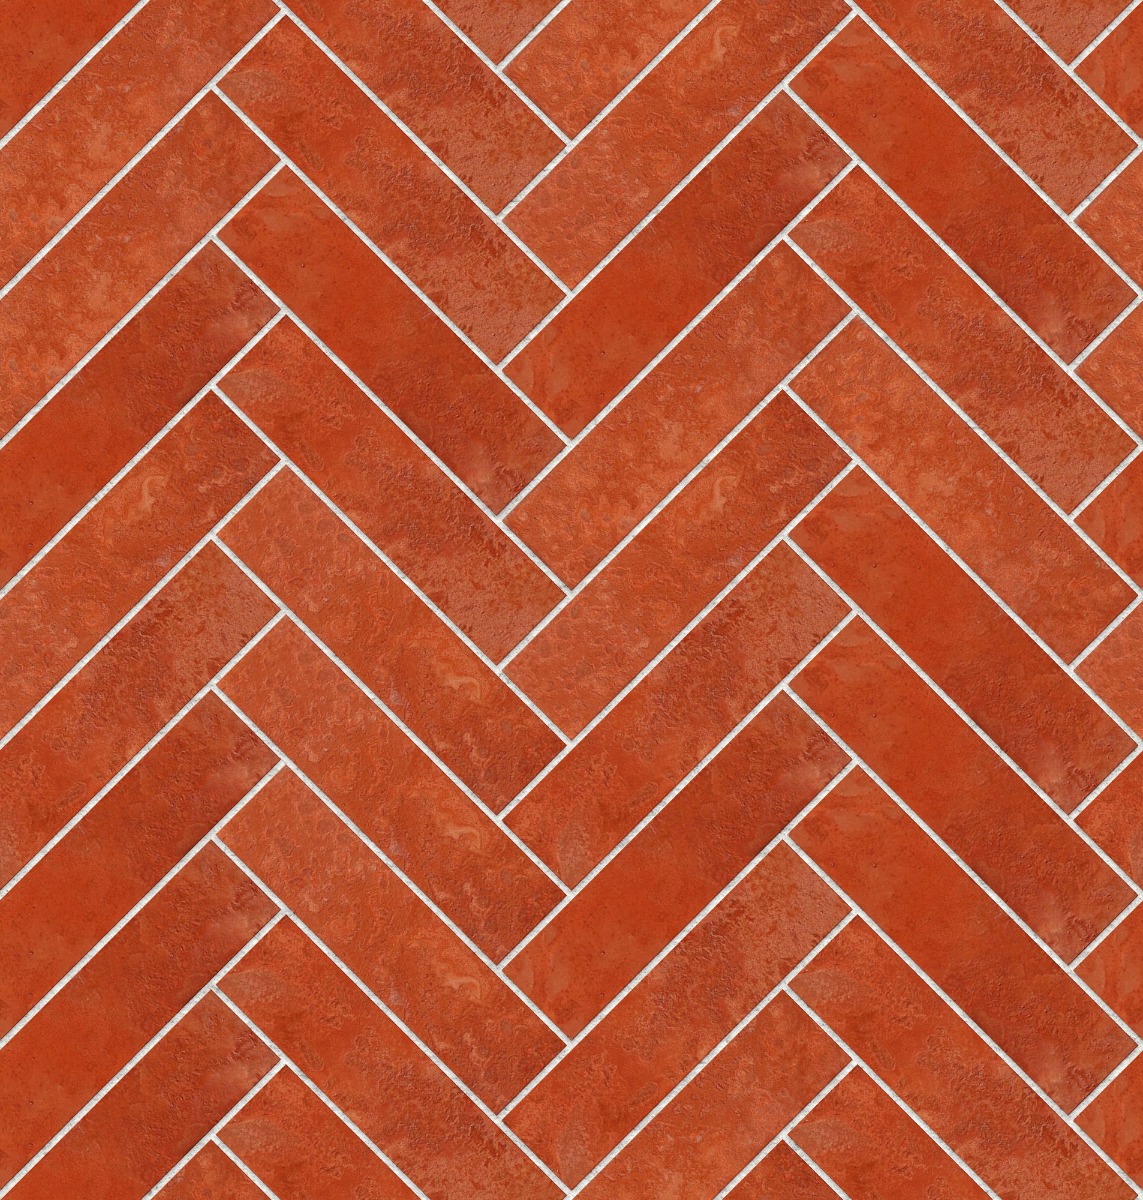 A seamless tile texture with terracotta metro tile tiles arranged in a Herringbone pattern